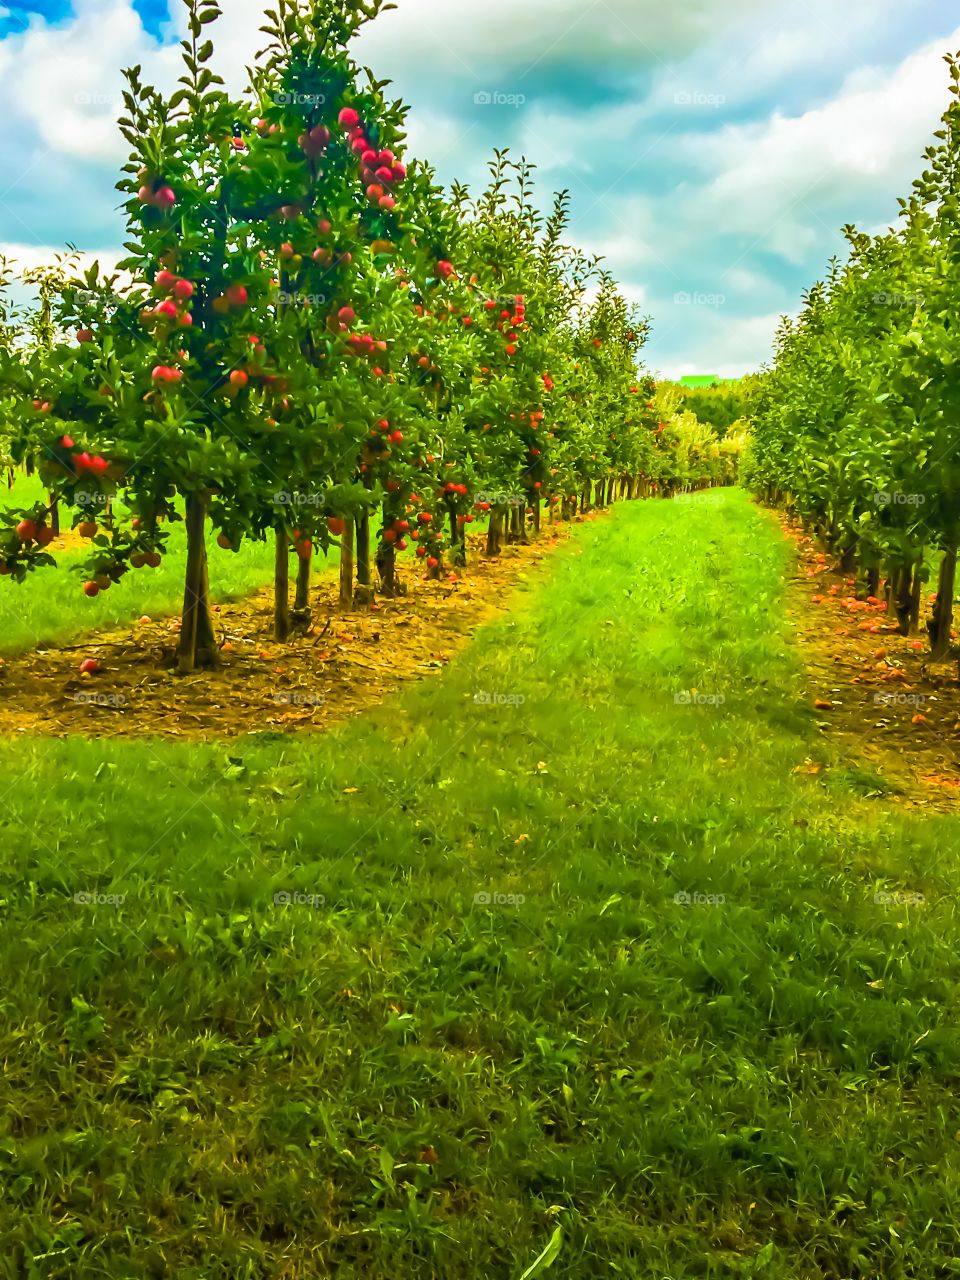 Apples orchard 